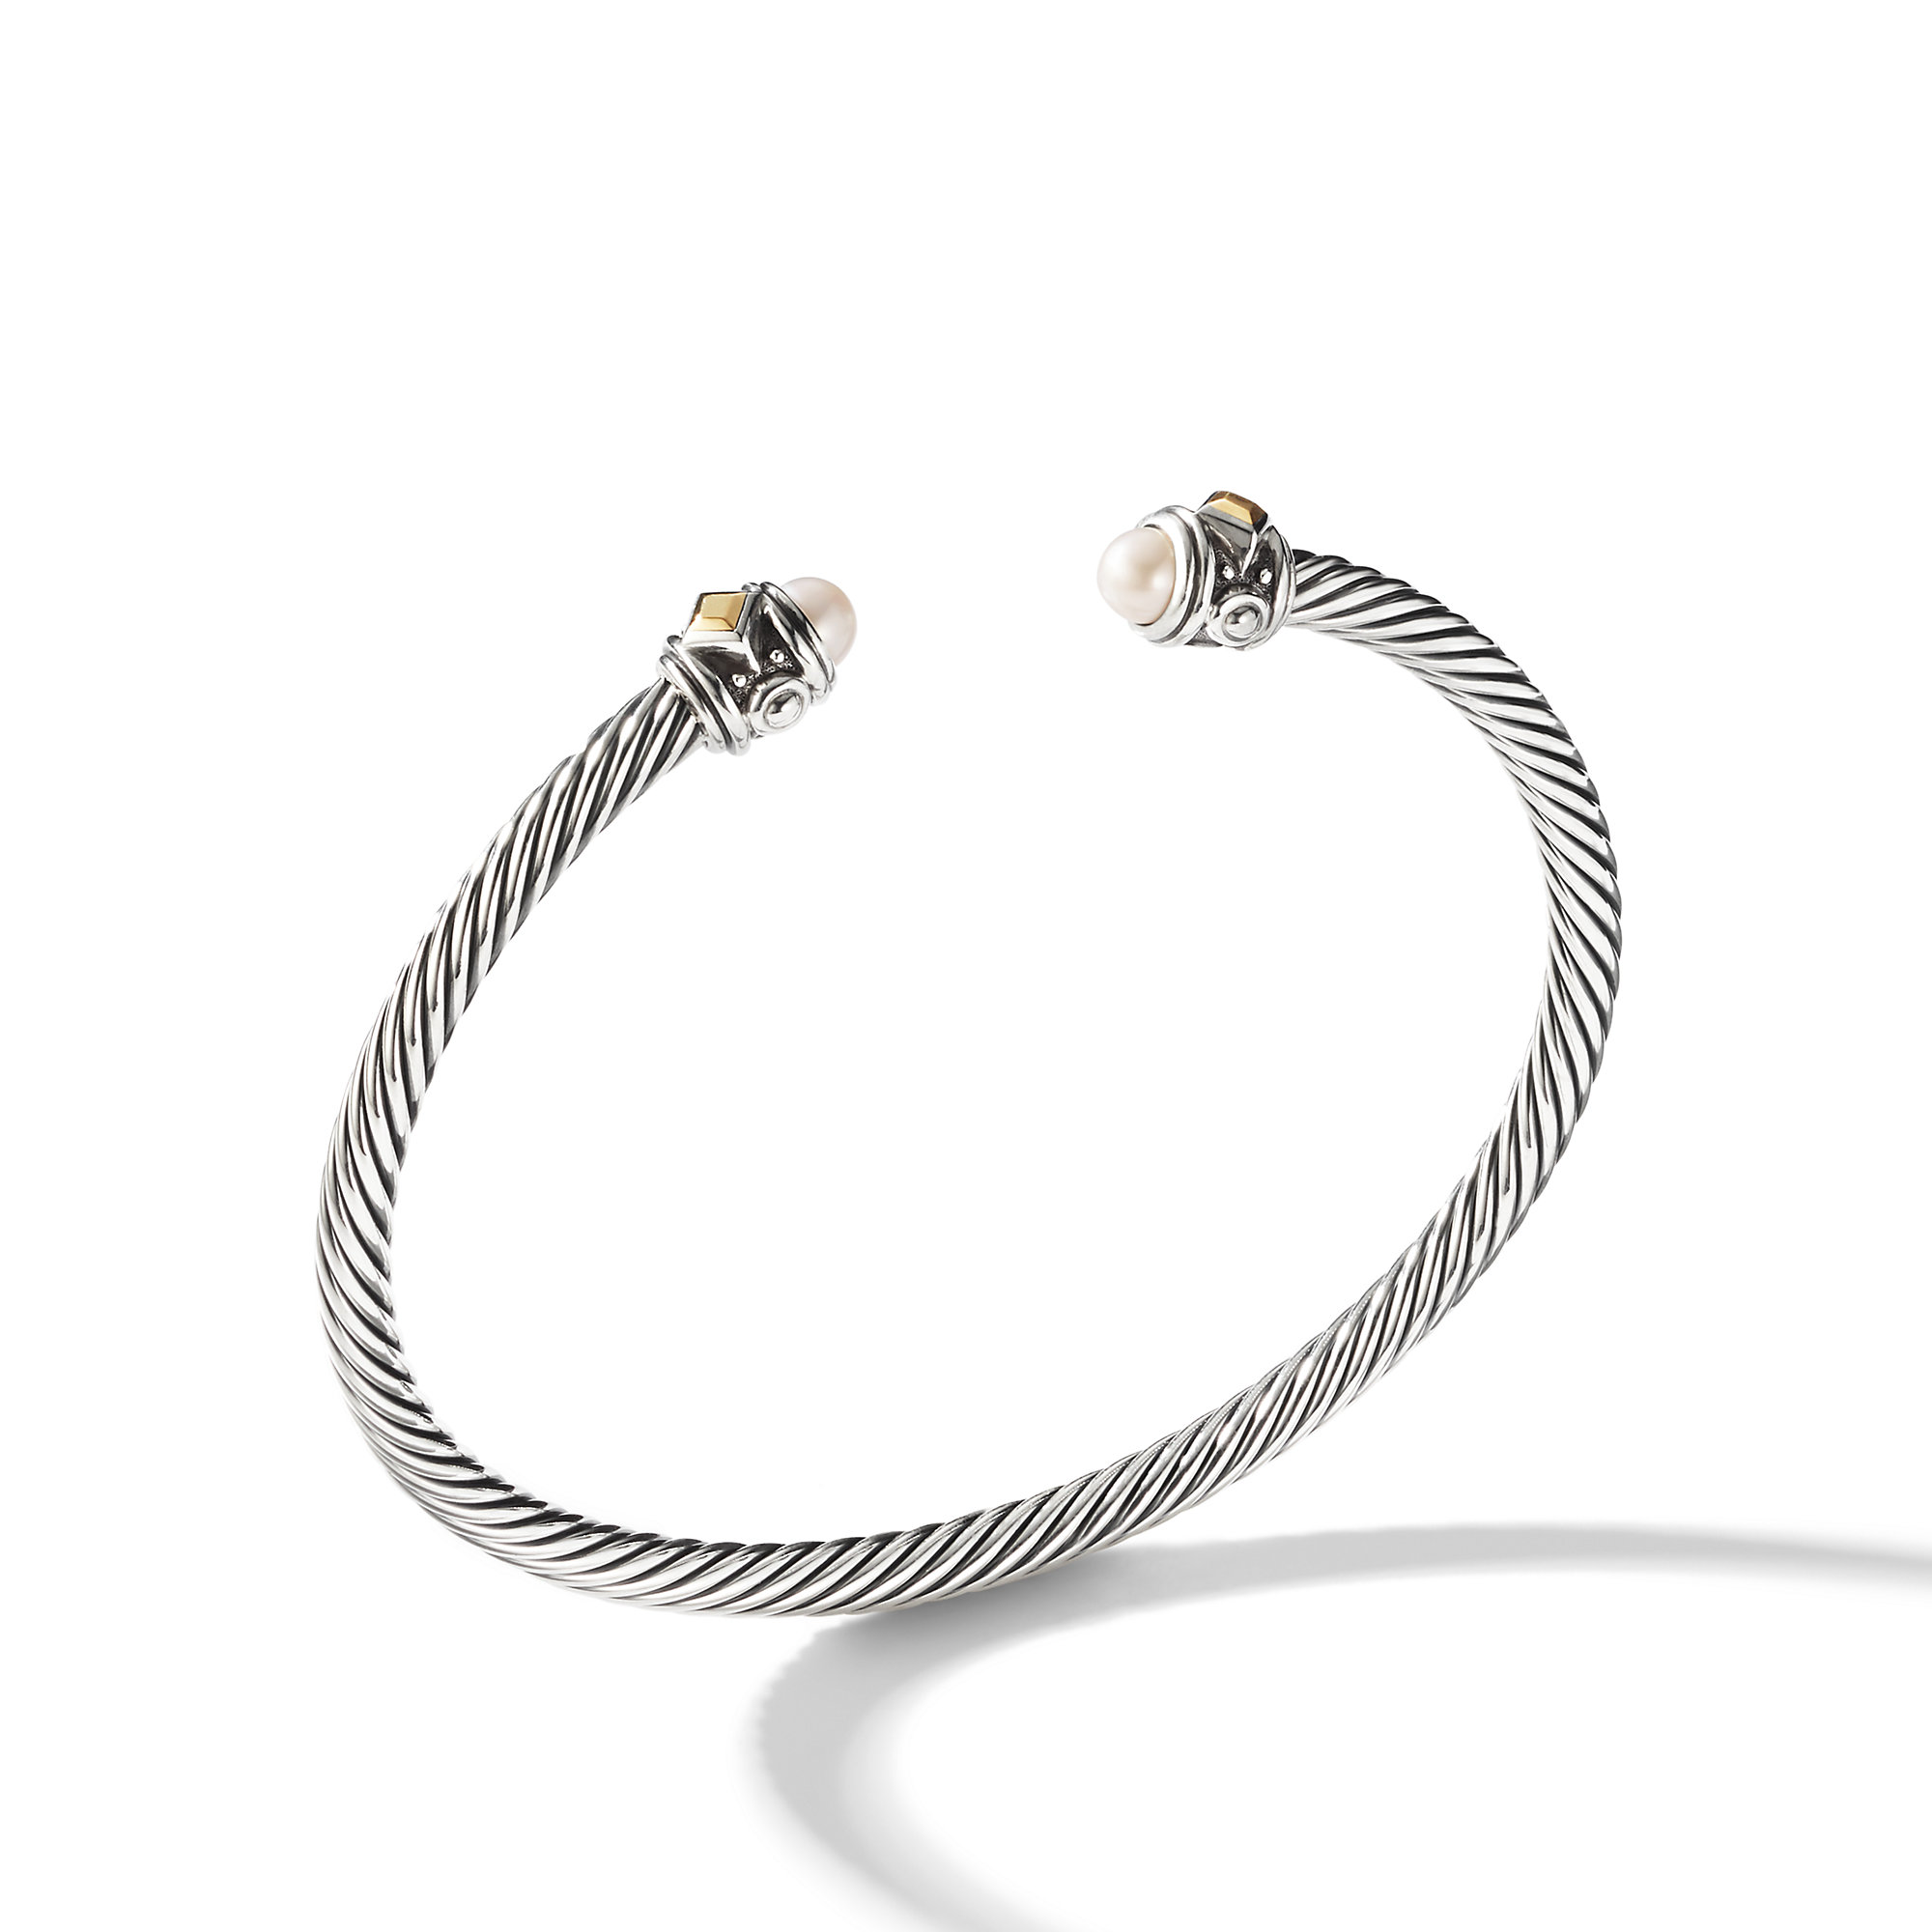 Renaissance Bracelet in Sterling Silver with Pearls and 18K Yellow Gold